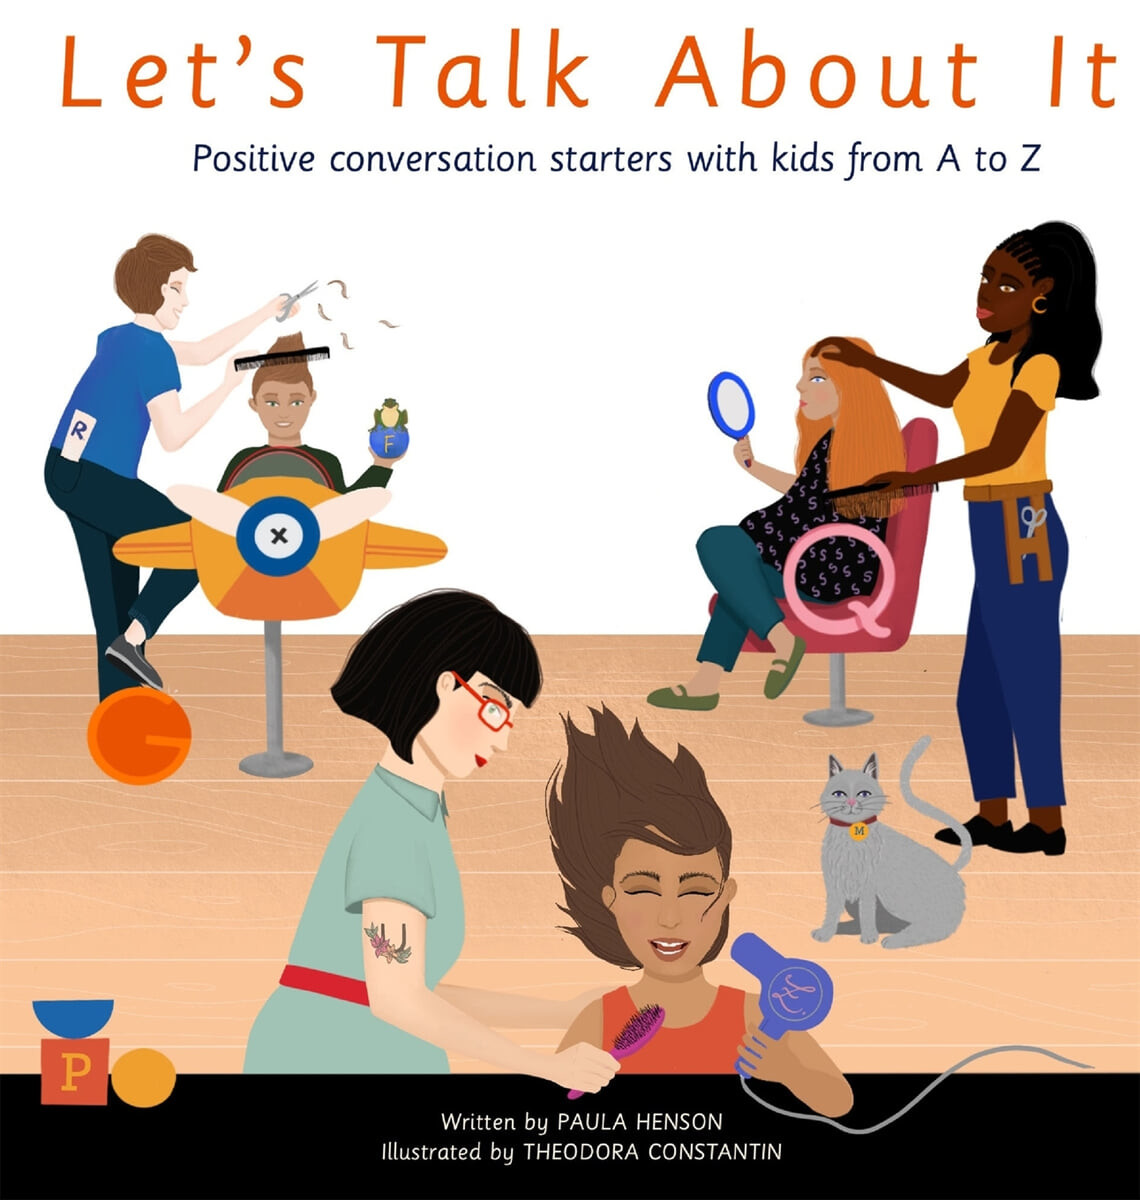 Let's talk about it: Positive conversation starters wiht kids from A to Z